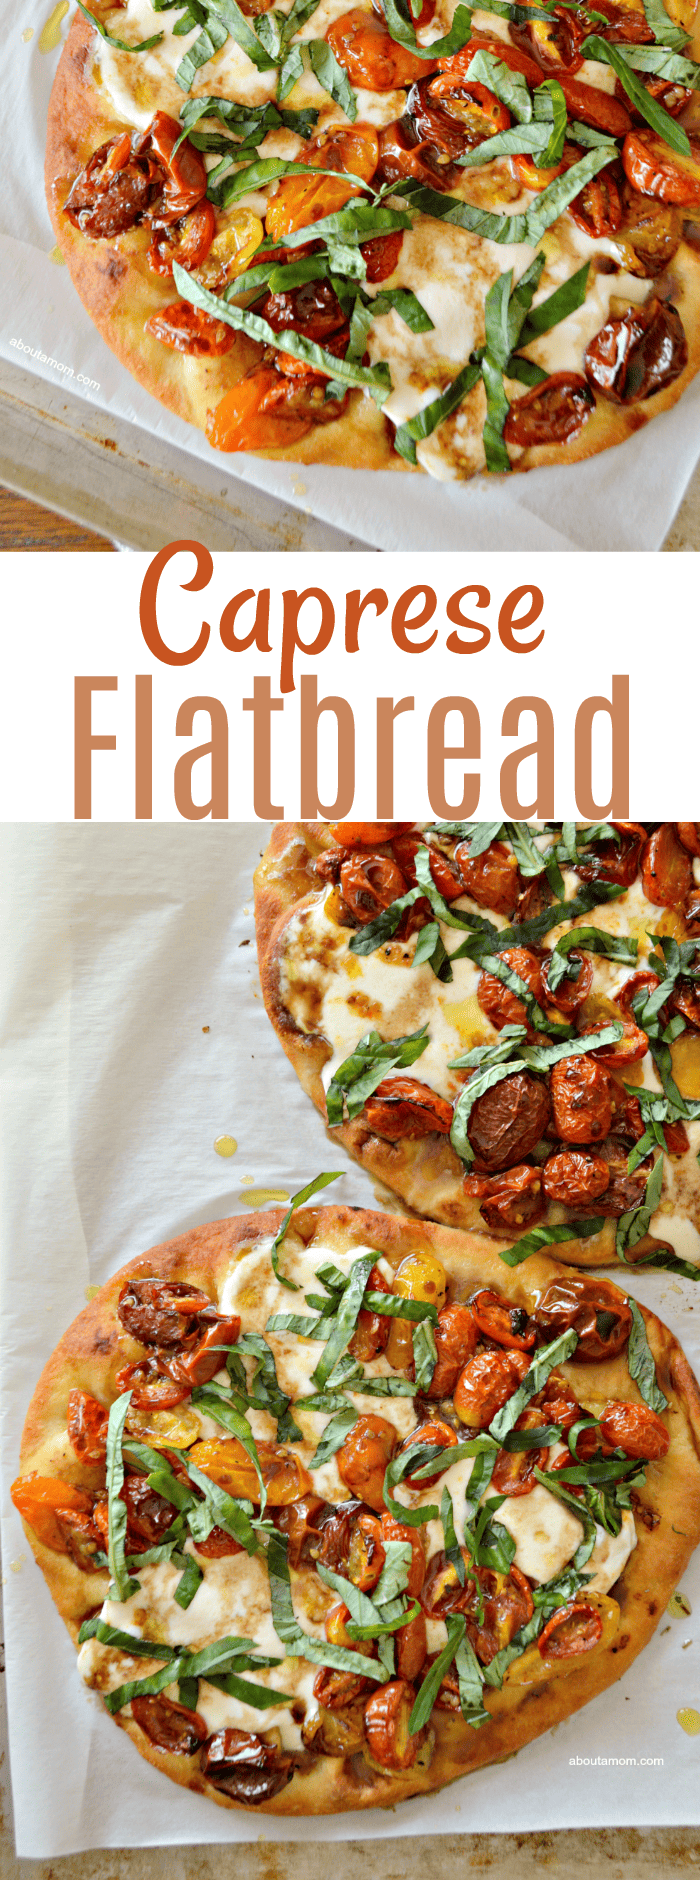 A roasted tomato and basil flatbread topped with extra virgin olive oil and balsamic reduction. This Caprese Flatbread Pizza recipe combines all the ingredients of a classic Caprese salad.